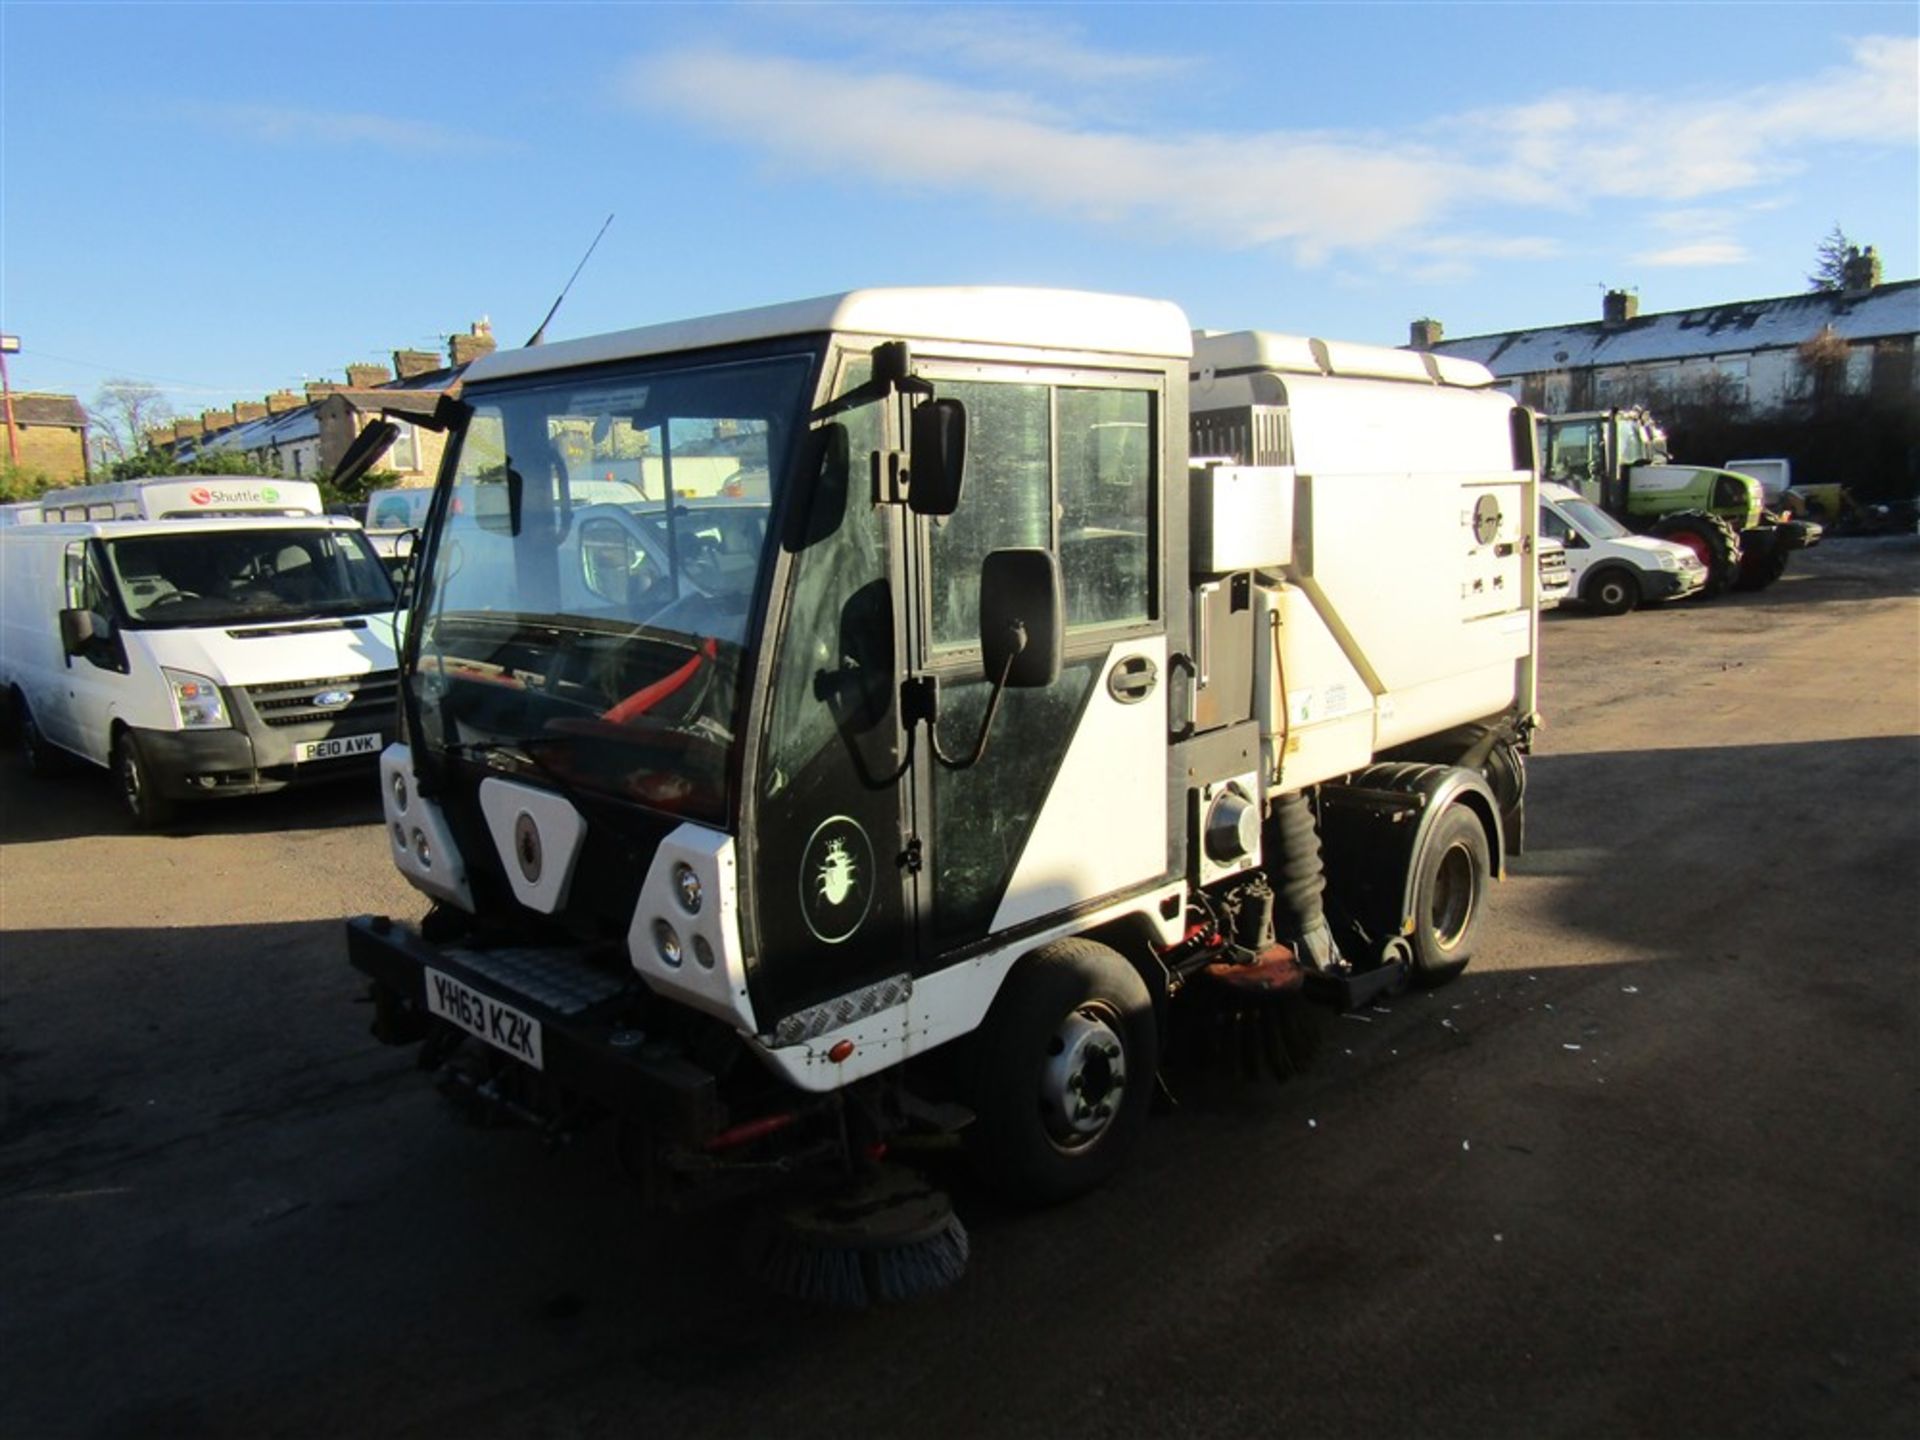 63 reg SCARAB MINOR SWEEPER (DIRECT COUNCIL) 1ST REG 12/13, 45616.9M, V5 HERE, 1 OWNER FROM [+ VAT]